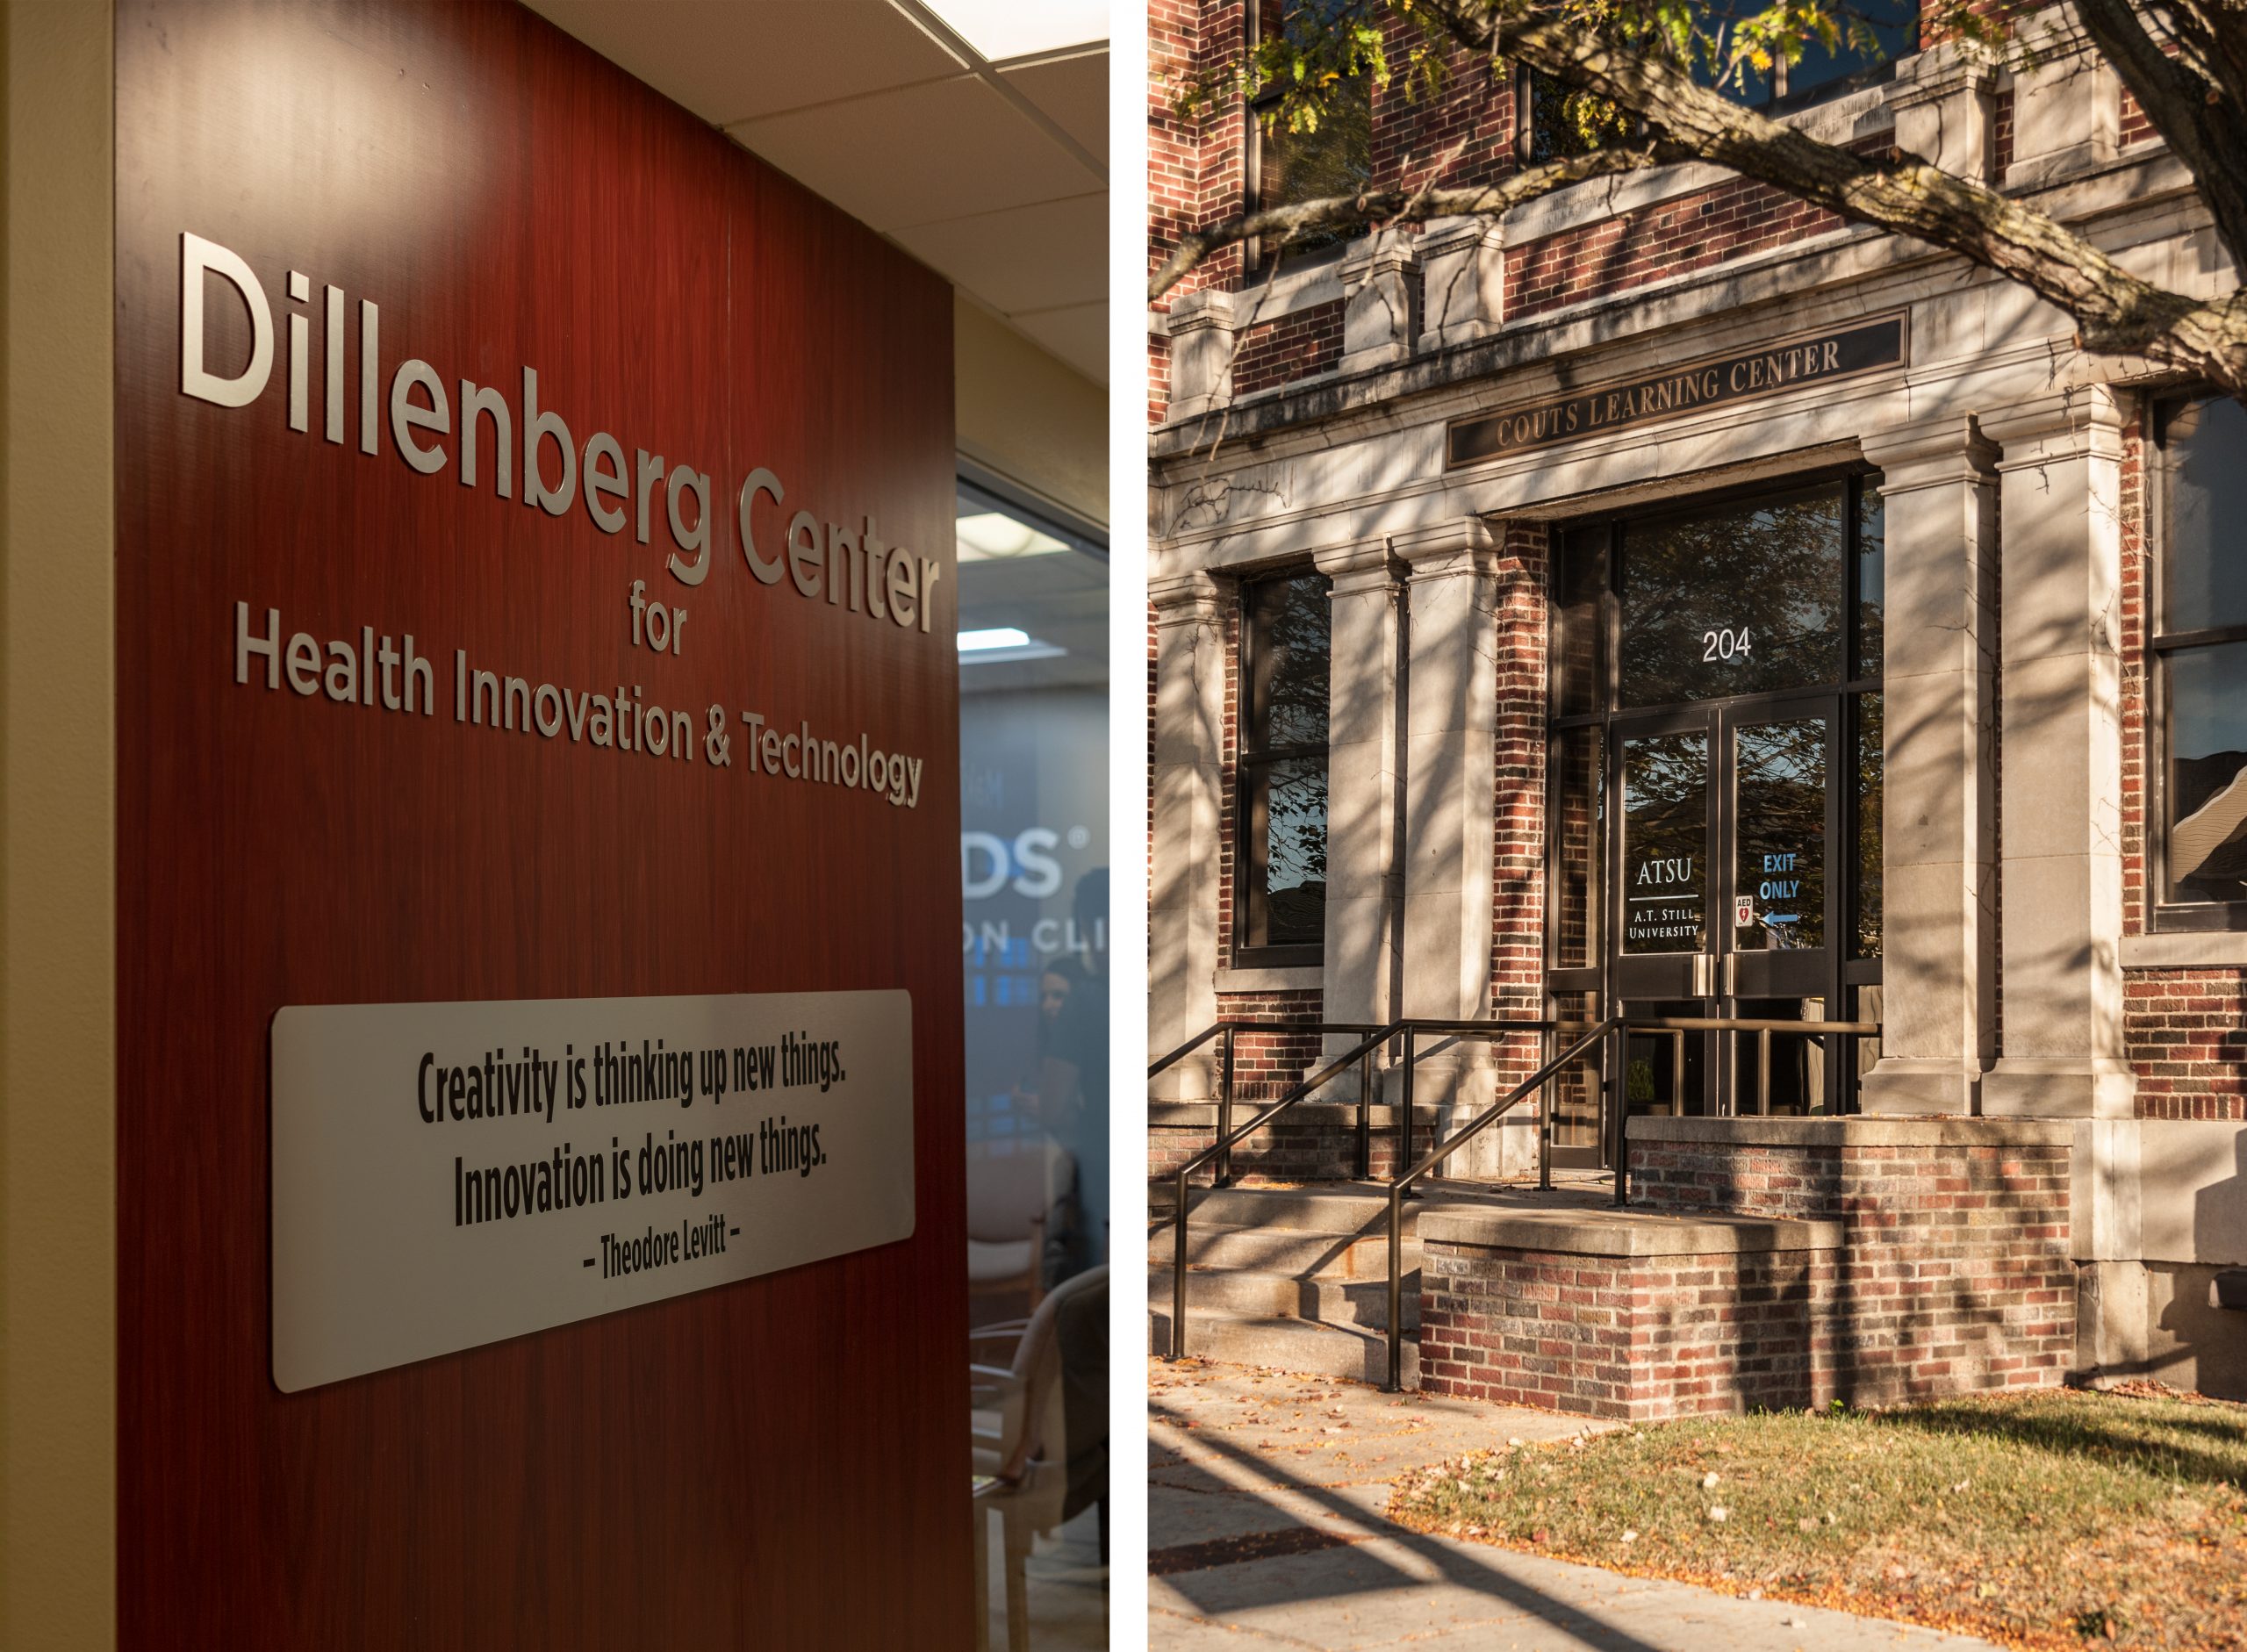 Dillenberg Center for Health Innovation and Technology and Couts Learning Center